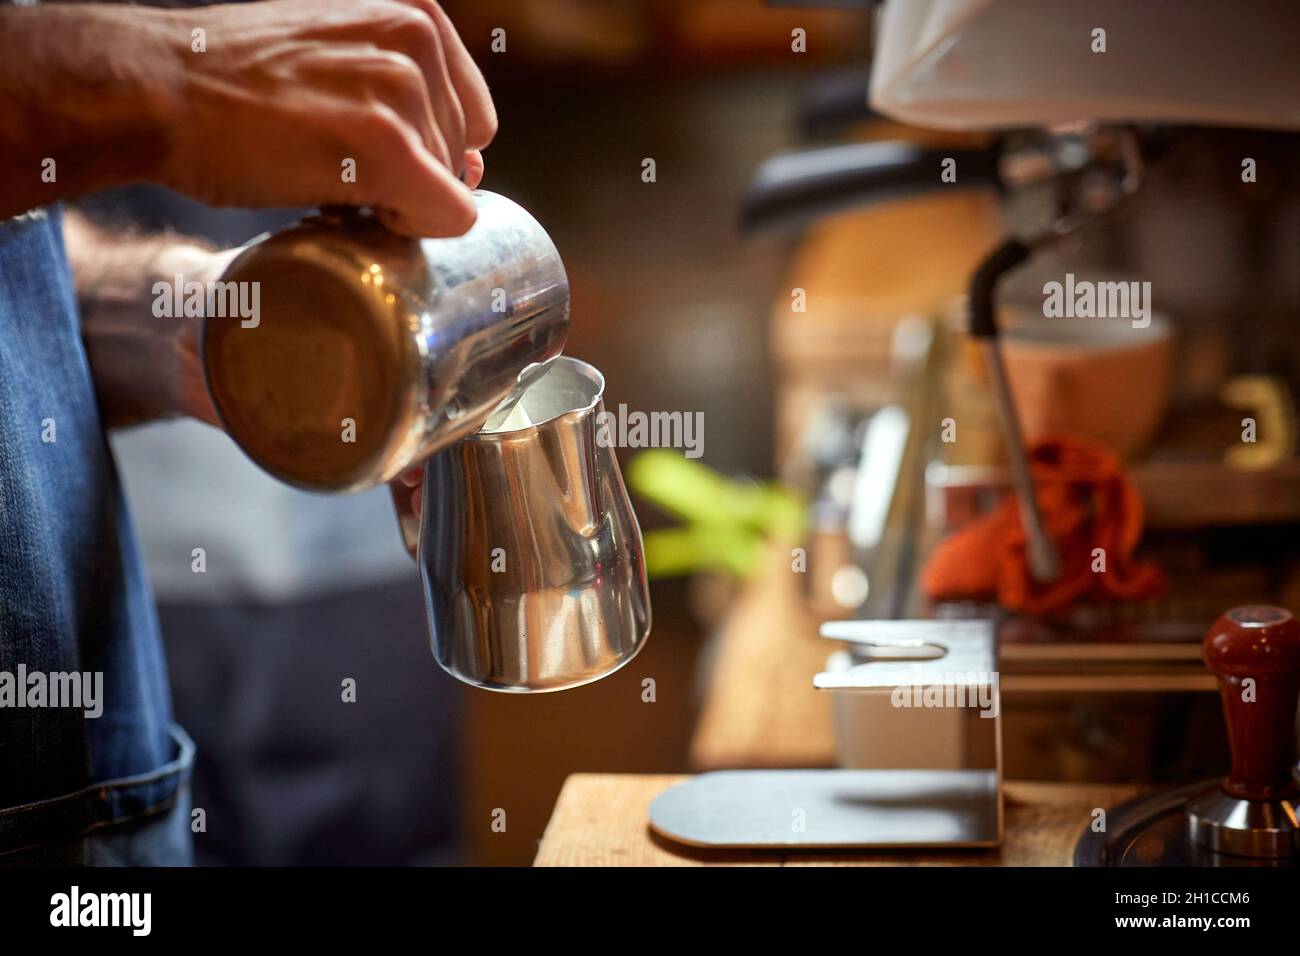 A barman is preparing a milk to make an aromatic and fragrant espresso in the apparatus. Coffee, beverage, bar Stock Photo